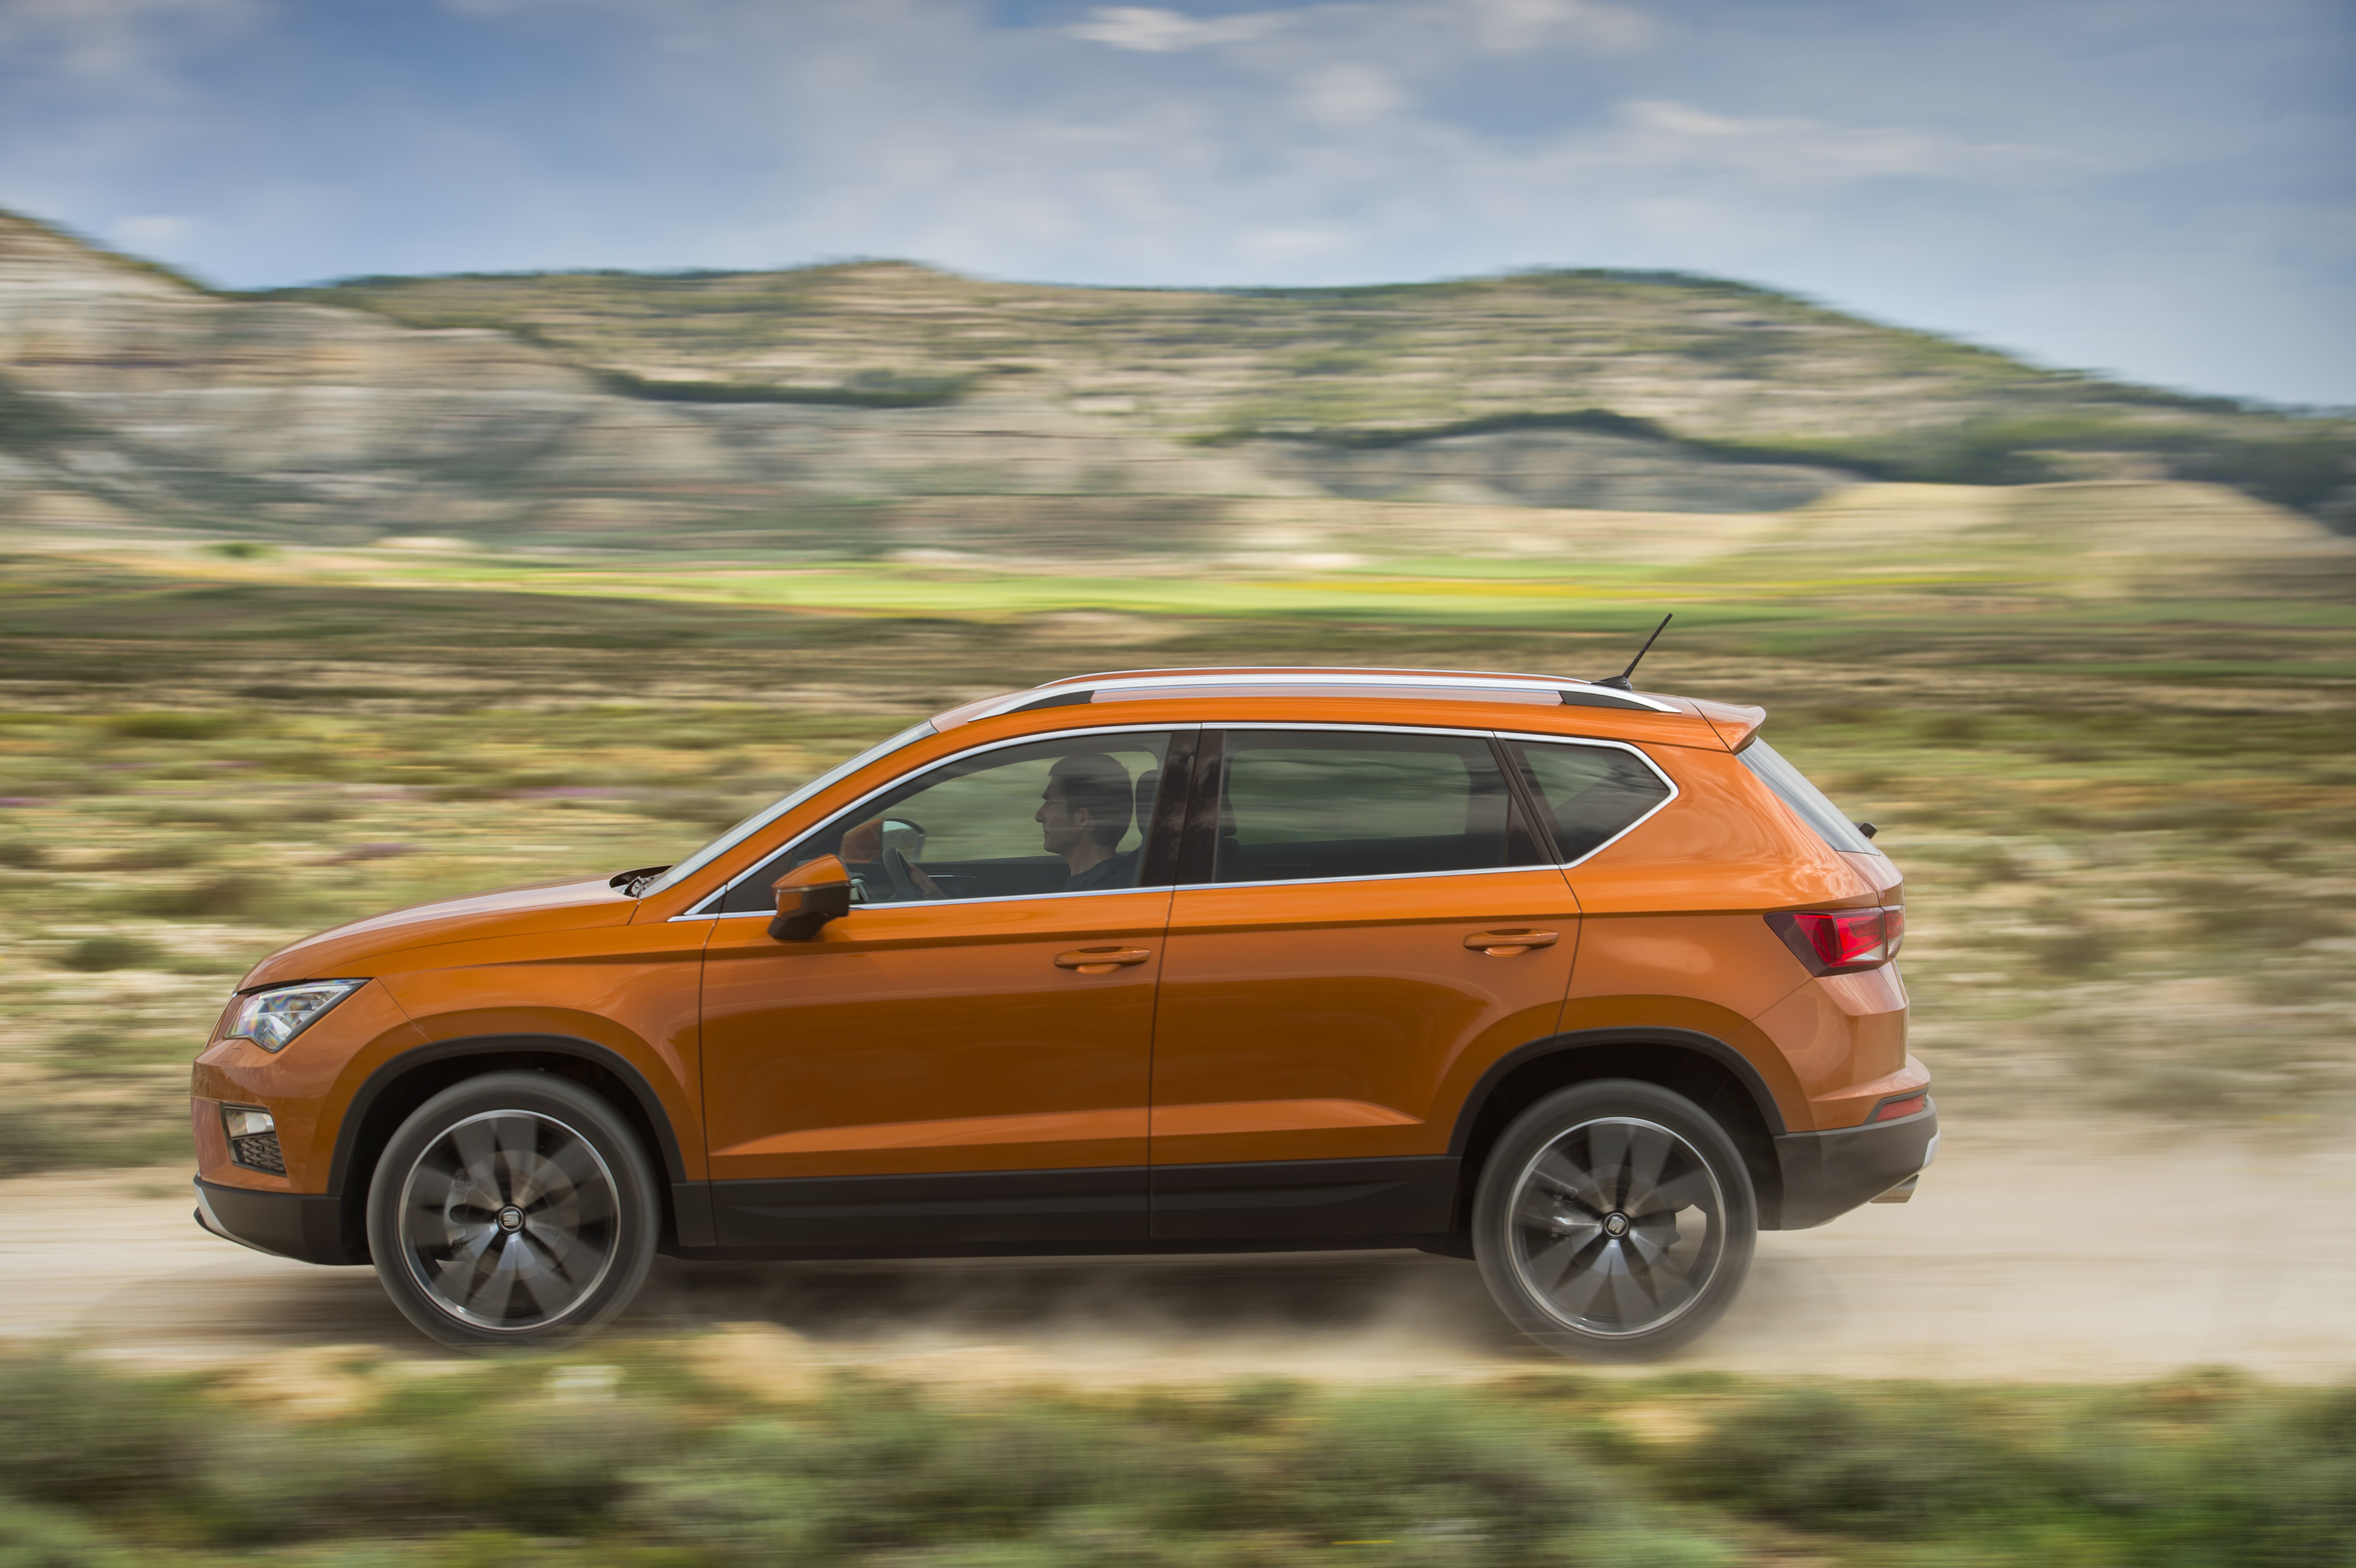 2016 Seat Ateca side view